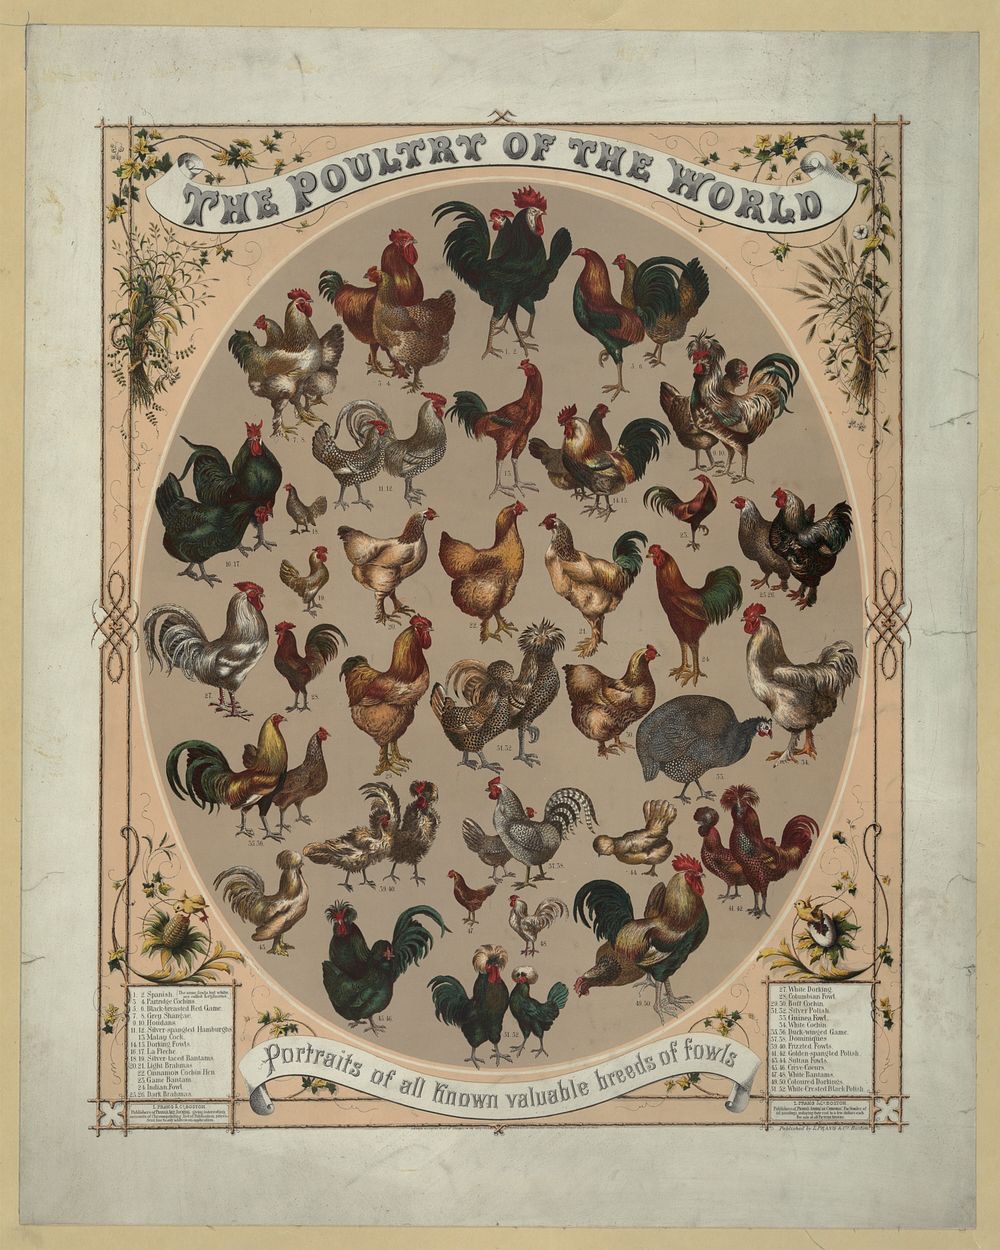 The poultry of the world--Portraits of all known valuable breeds of fowls, L. Prang & Co., publisher